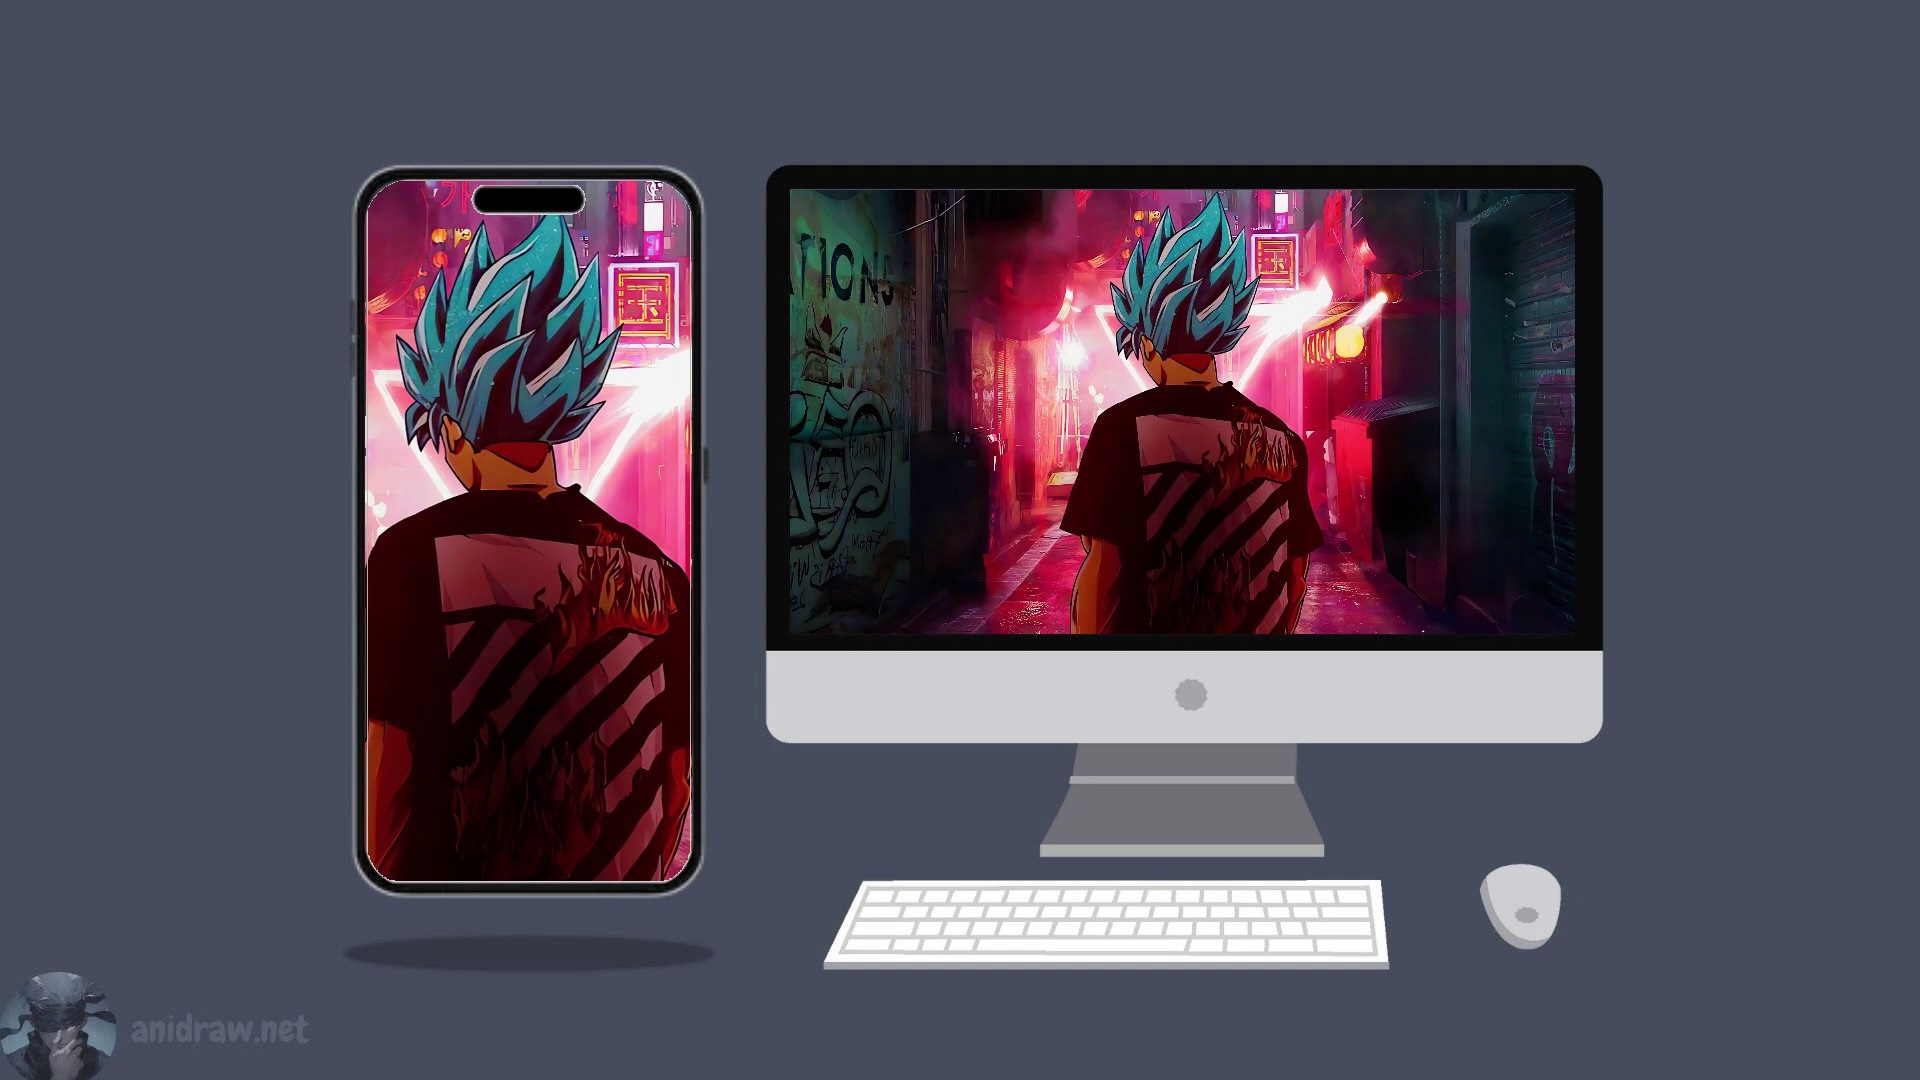 Goku In Streets Live Wallpapers Engine